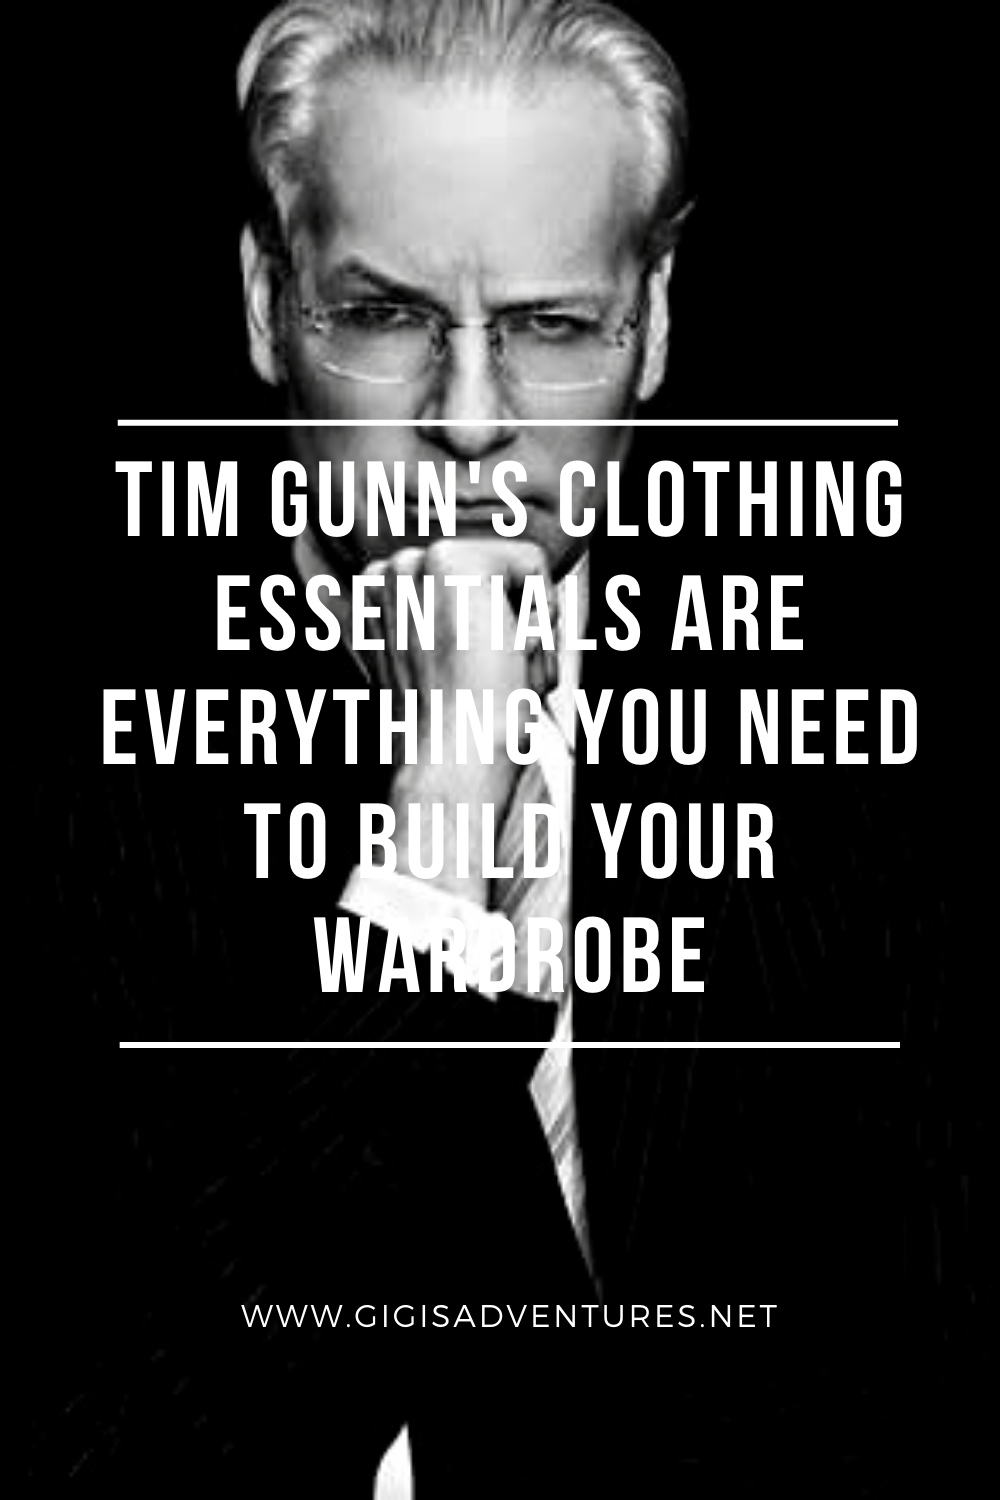 Tim Gunn Clothing Essentials Are Everything You Need To Build Your Wardrobe